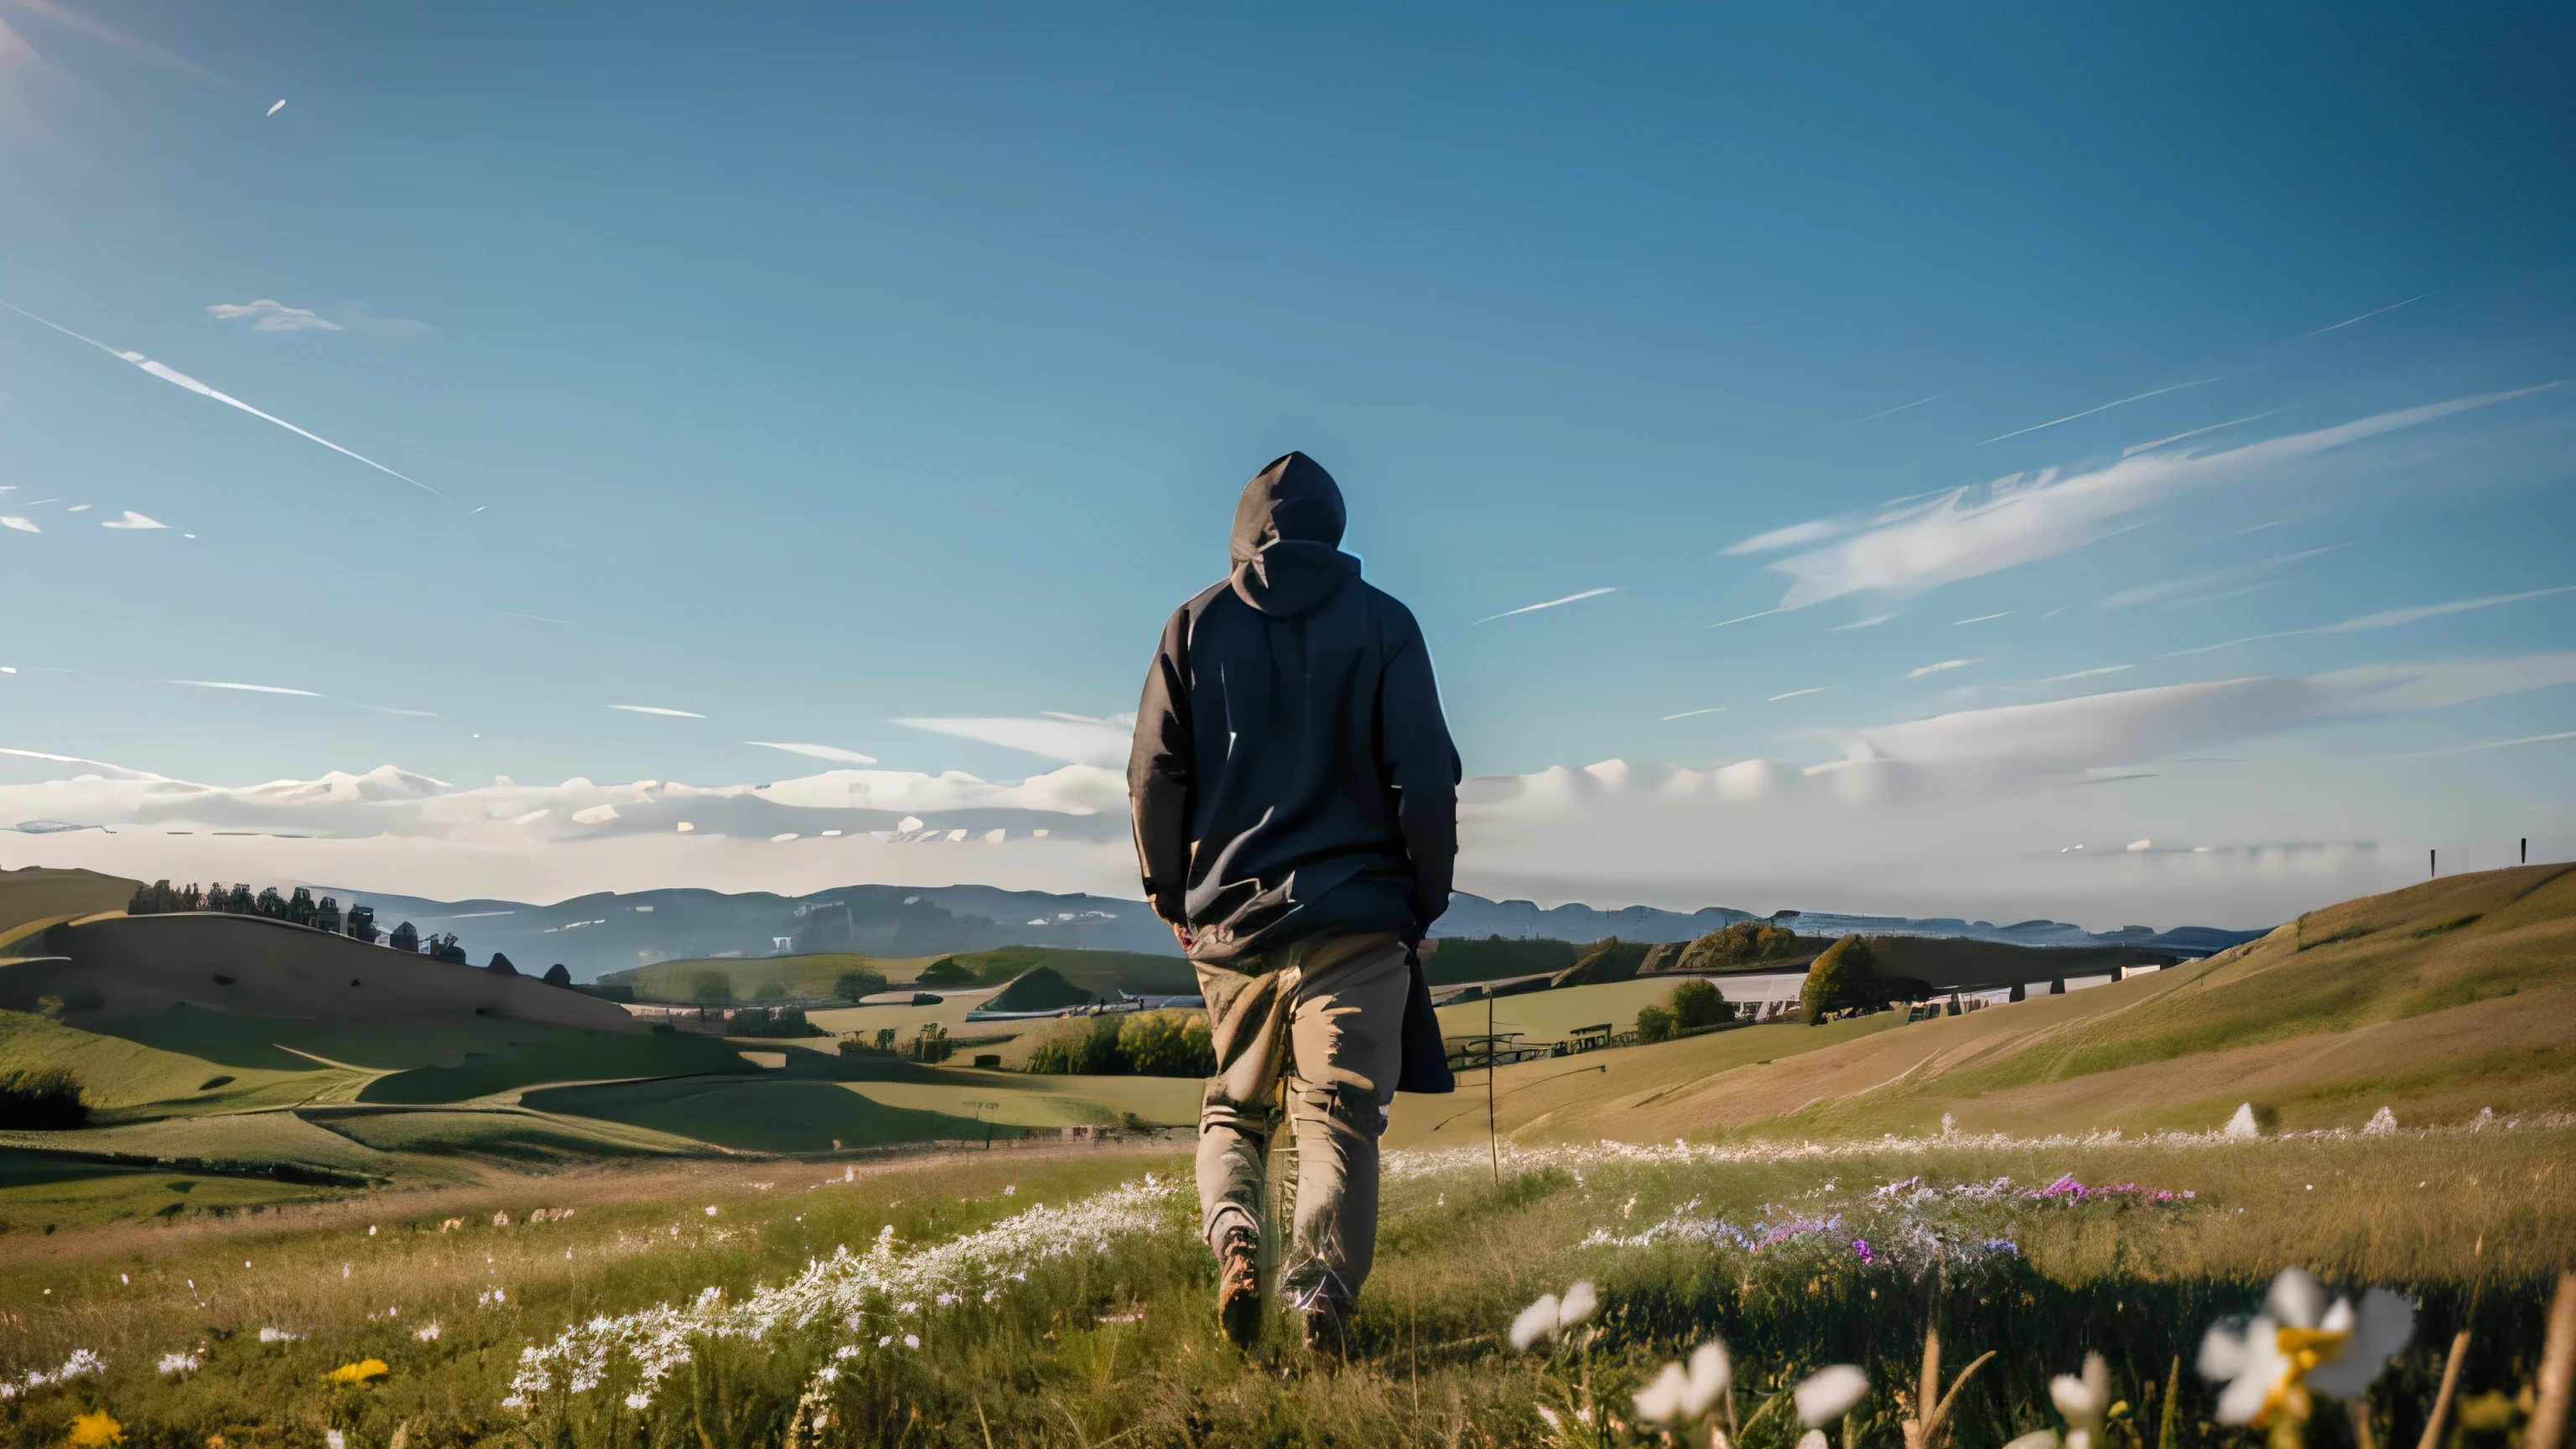 Create an image of a man in a hoodie walking proudly with his head held high, with a landscape of FIELD of flowers and grass, The hill in the distance is BEAUTIFUL NATURE , The sky is clear blue and filled with light, Realistic images, image from behind the man